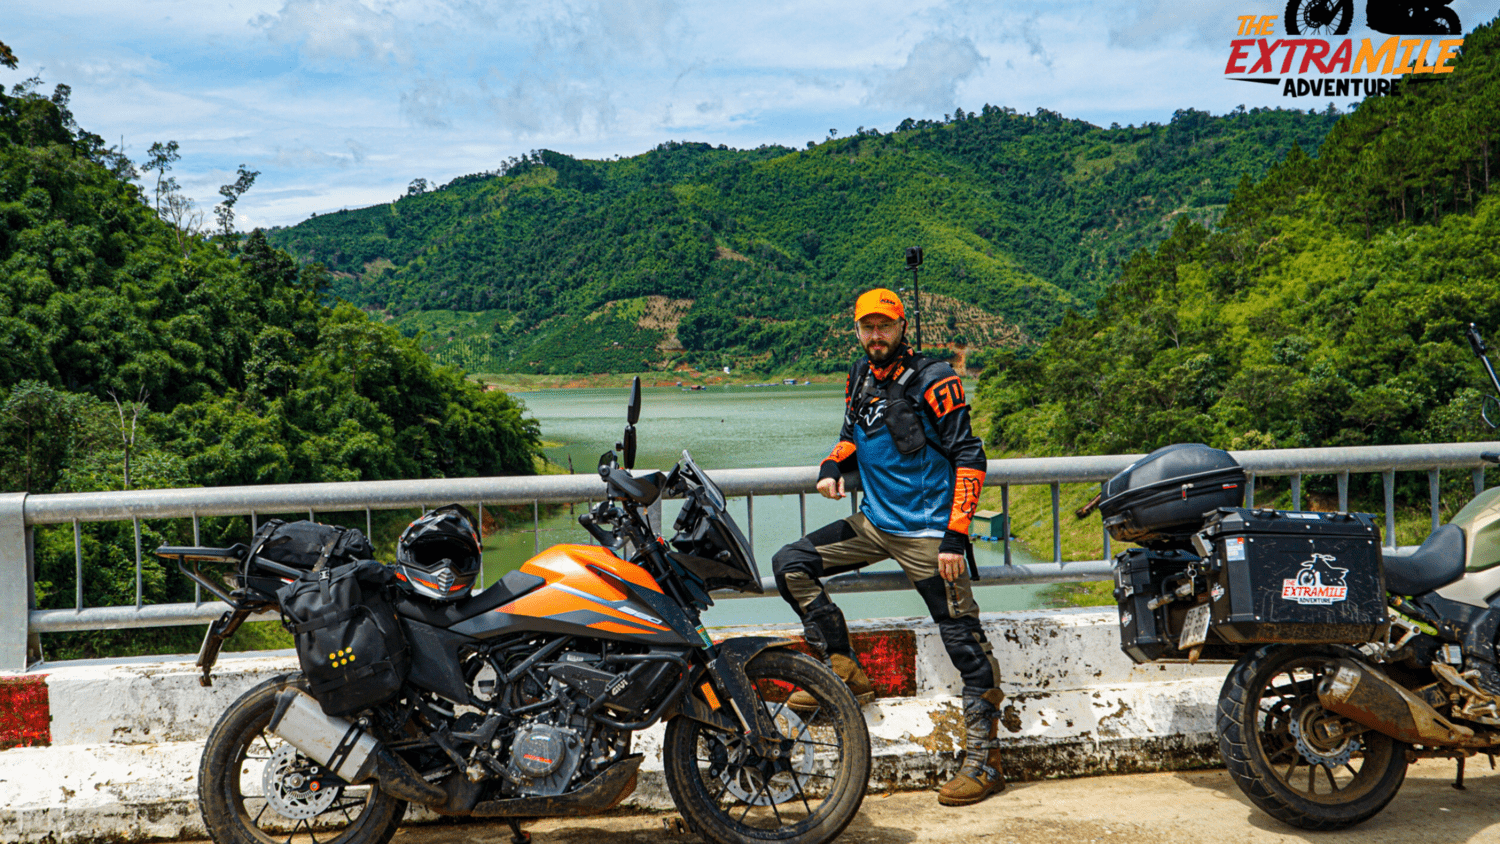 60 - SOUTHERN - Dak Nong - river crossing over a bridge with kawasaki versys 300c and honda cb500x The Extra Mile Adventure Motorbike Tours Vietnam